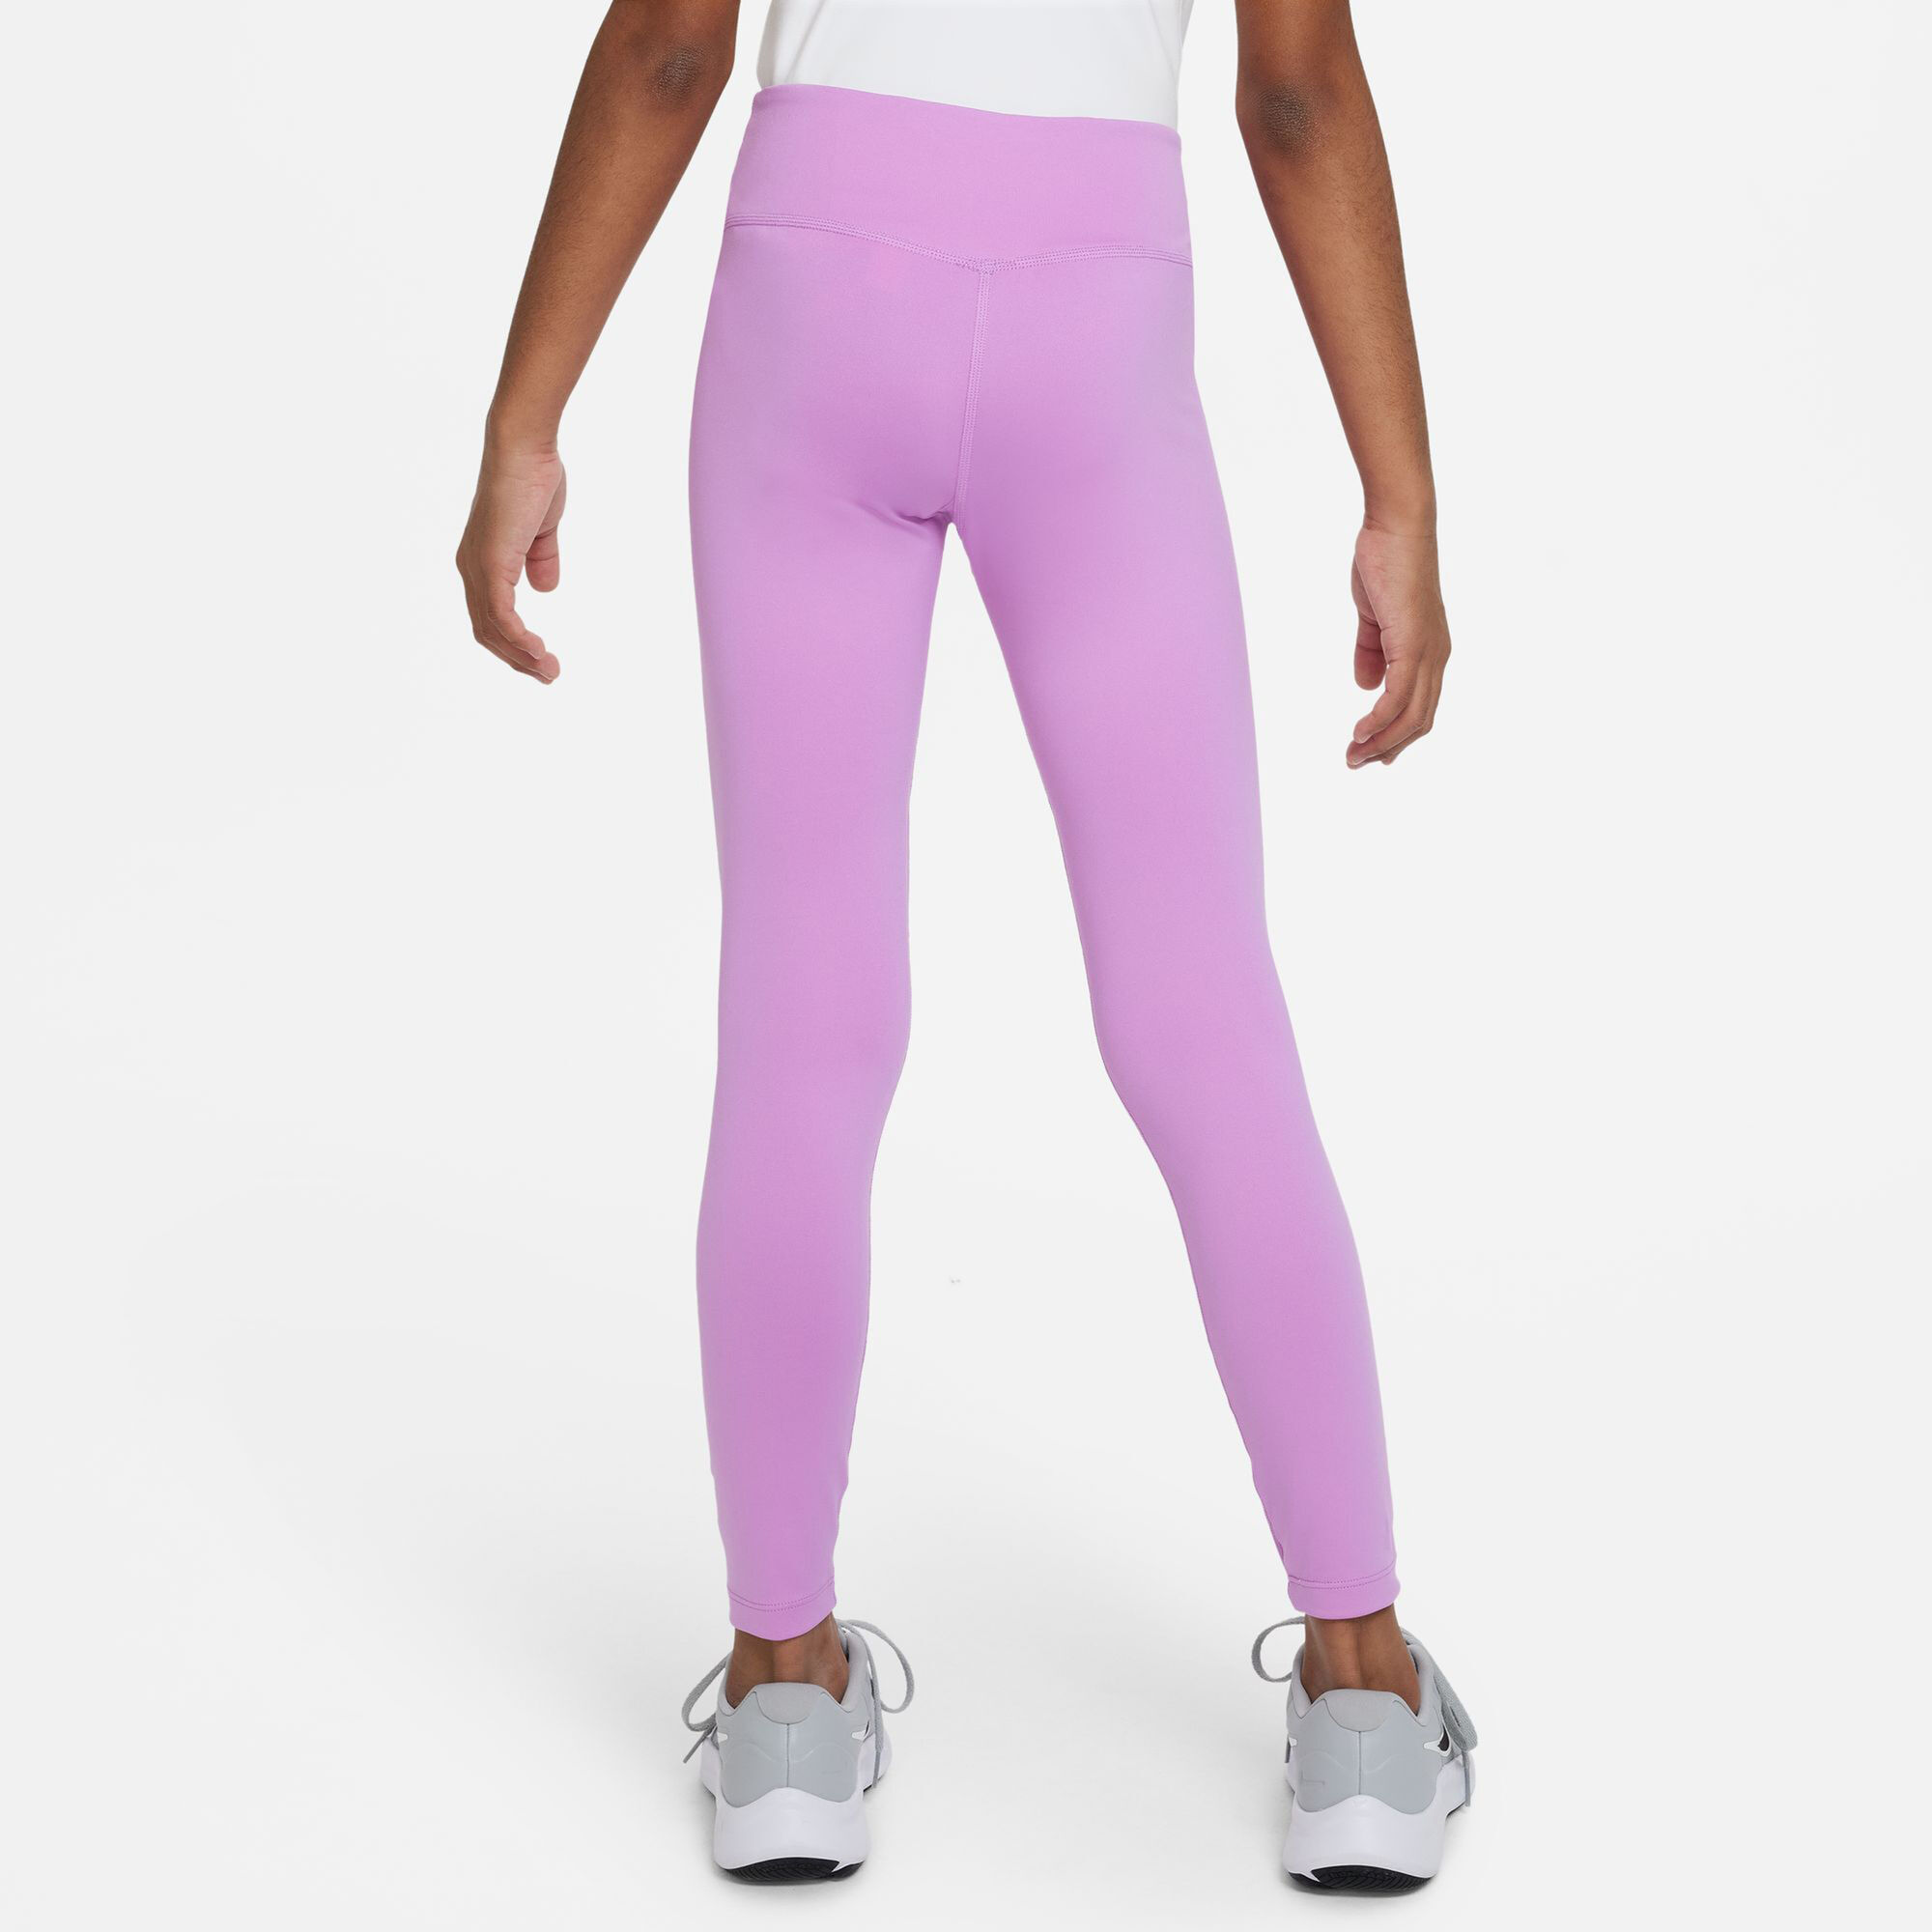 Buy Nike Dri-Fit One Tight Girls Violet online